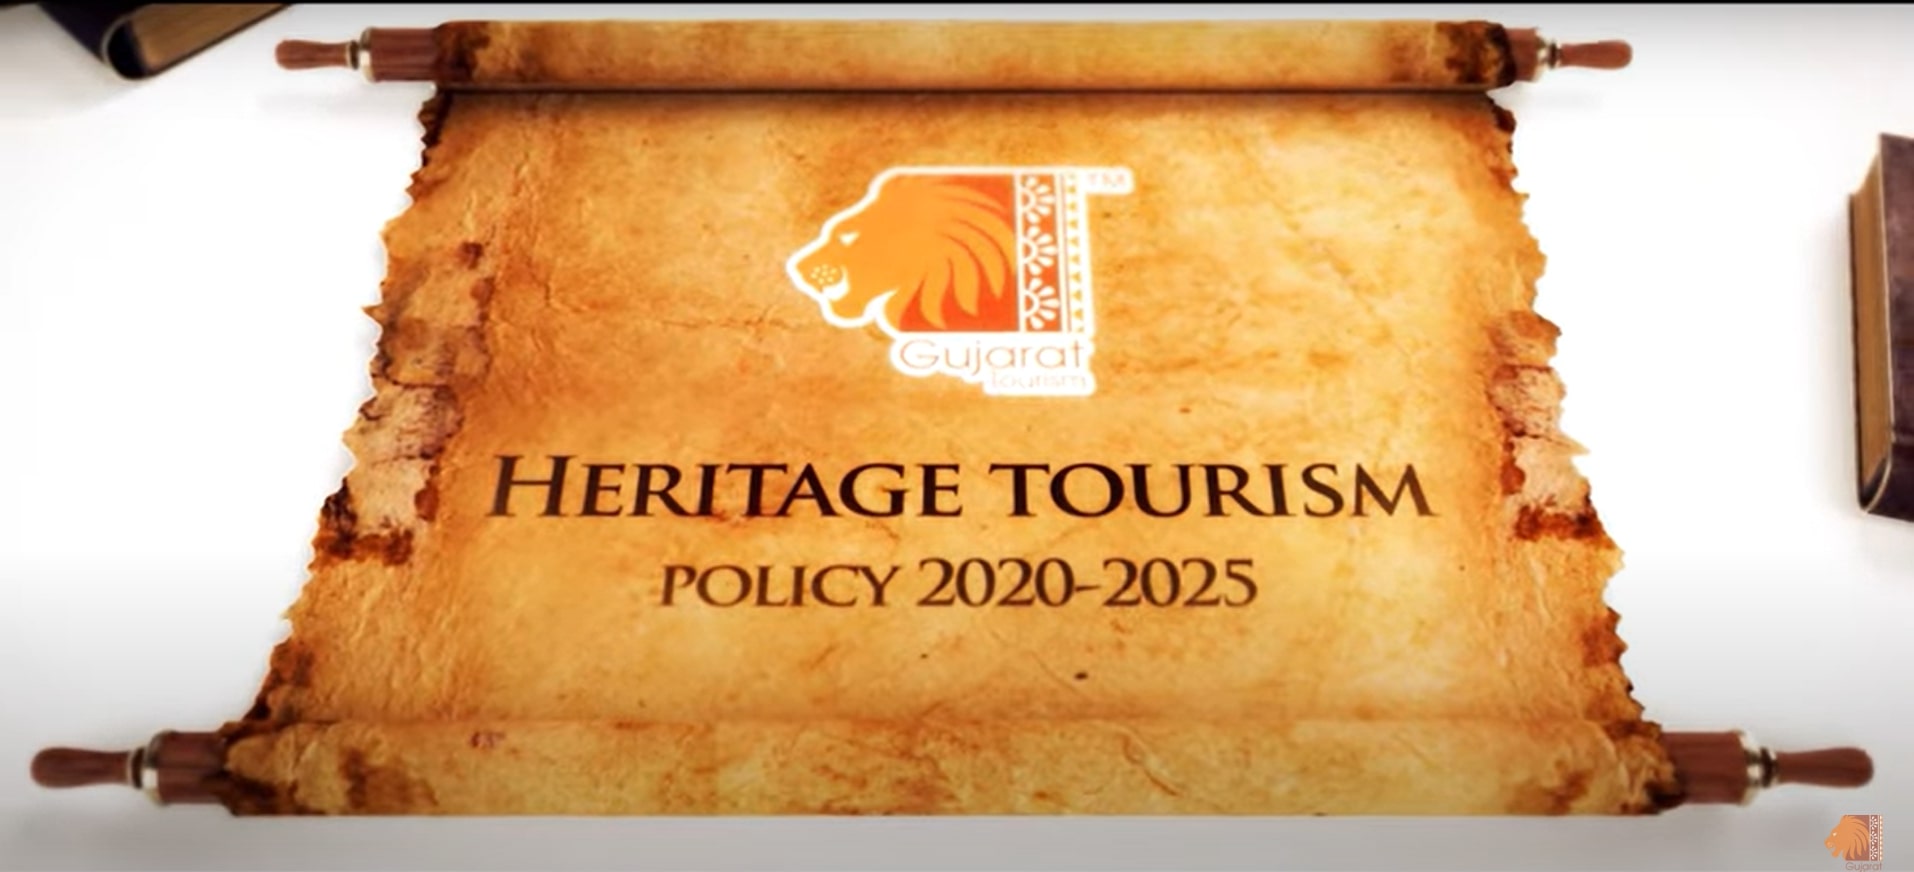 Heritage Tourism Policy 2020-2025